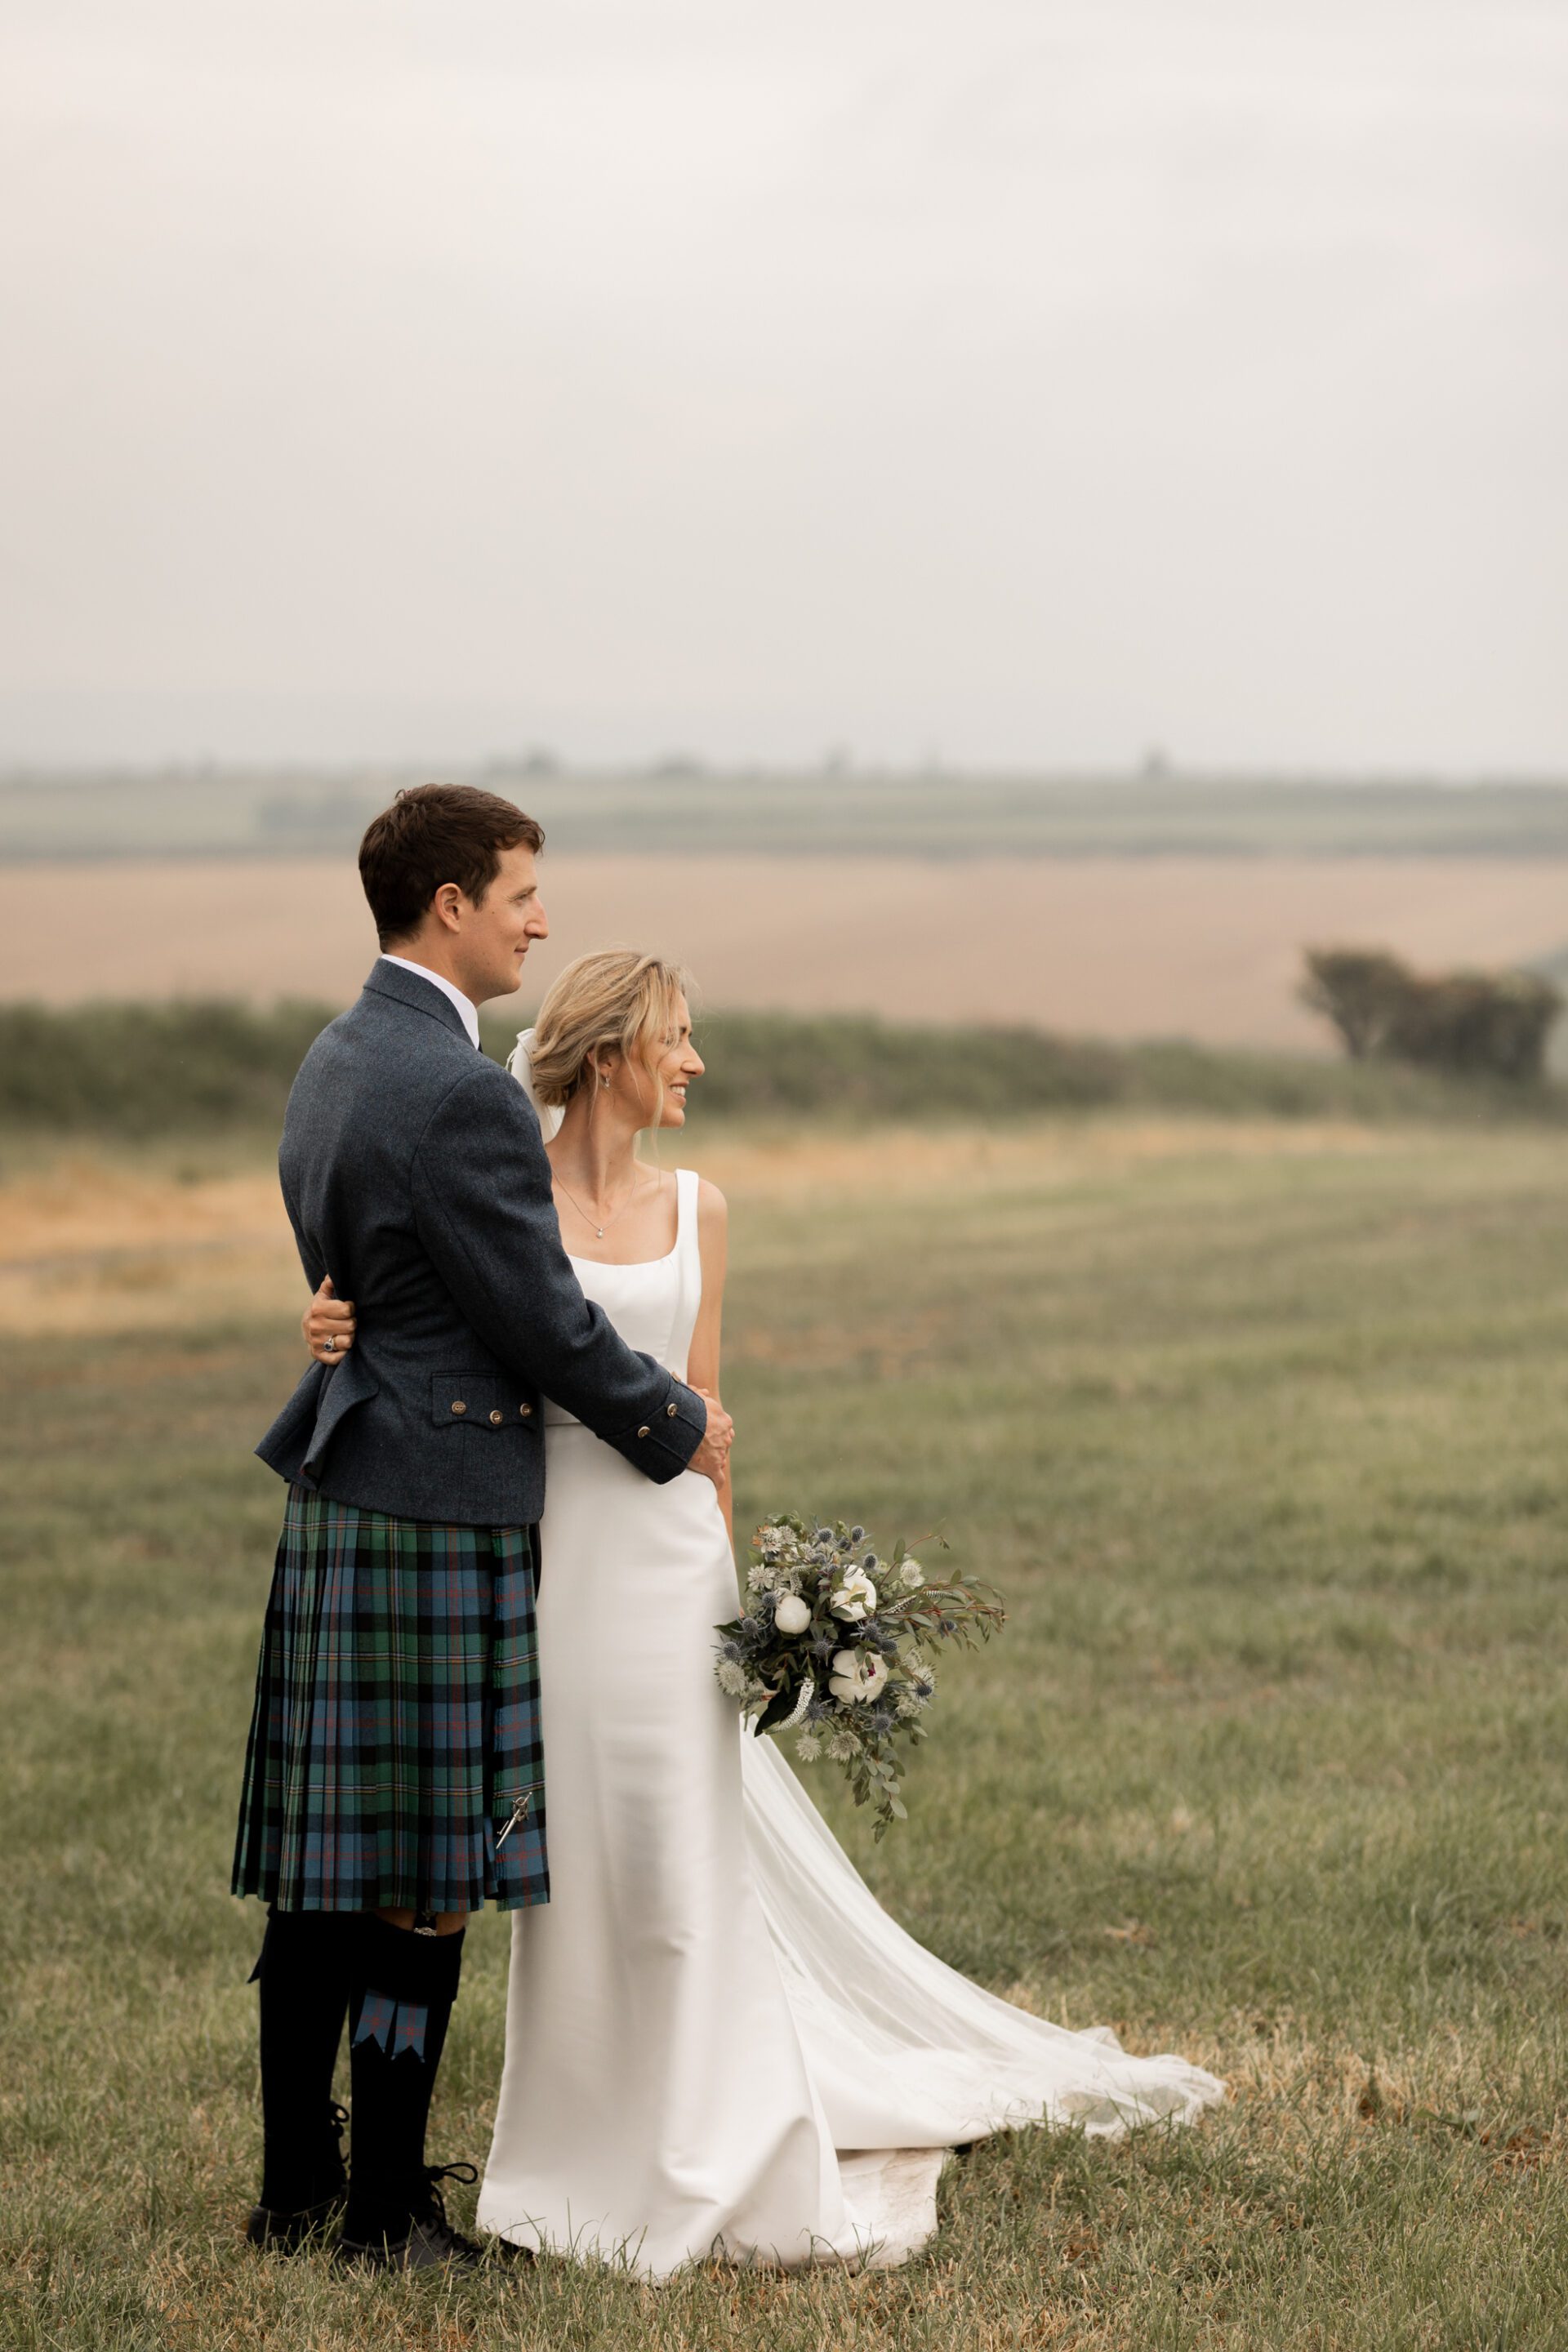 The bride and groom look off into the distance during their couples portrait session